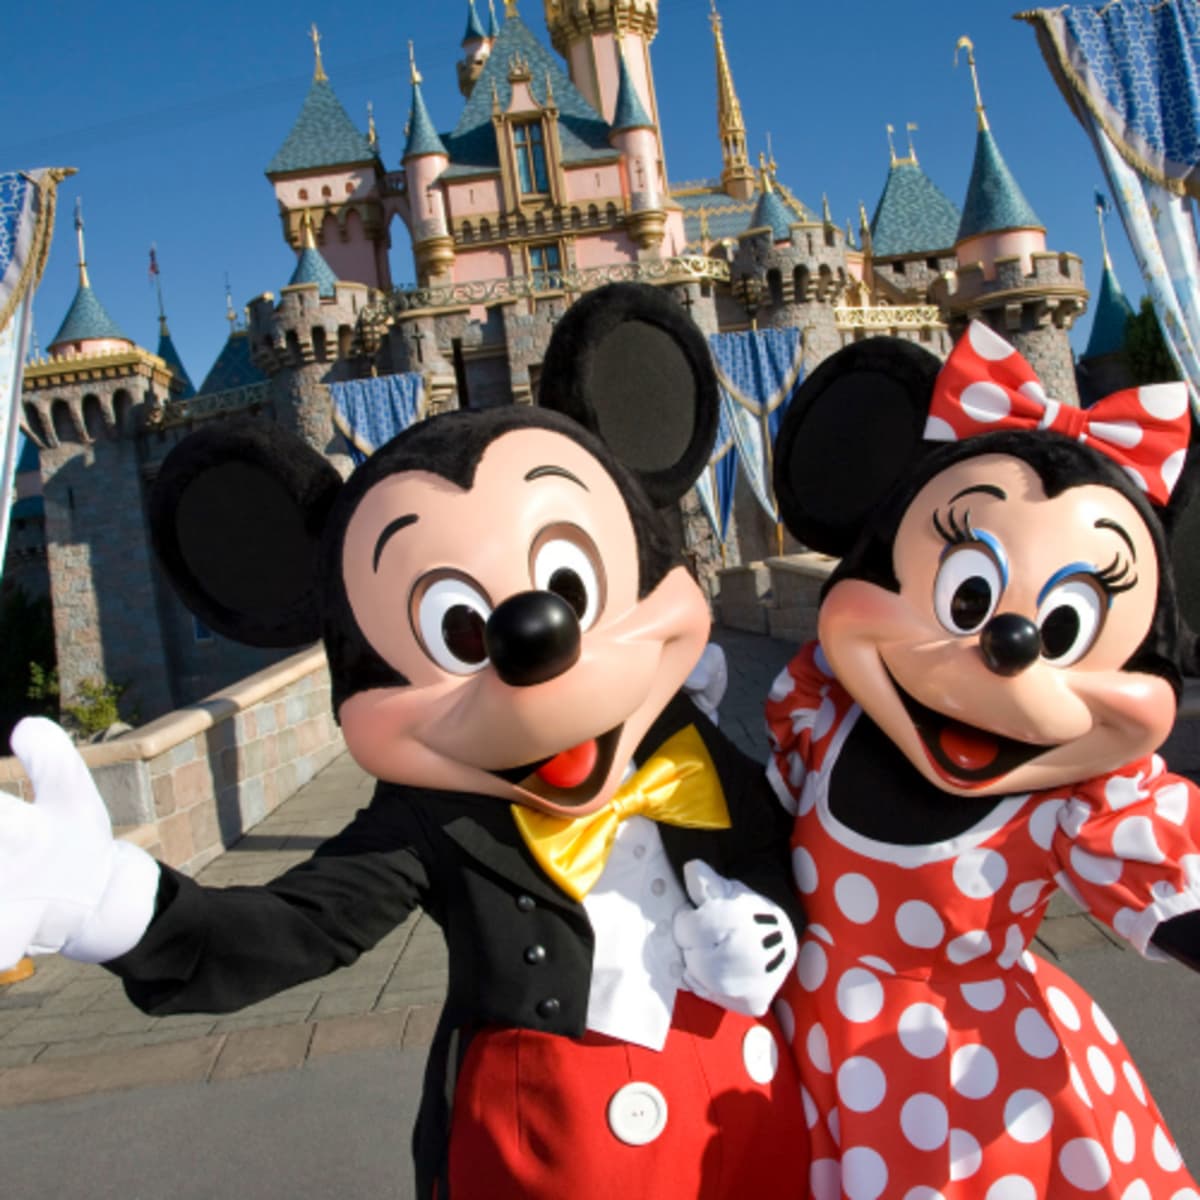 Fun Facts About Disney's Minnie Mouse